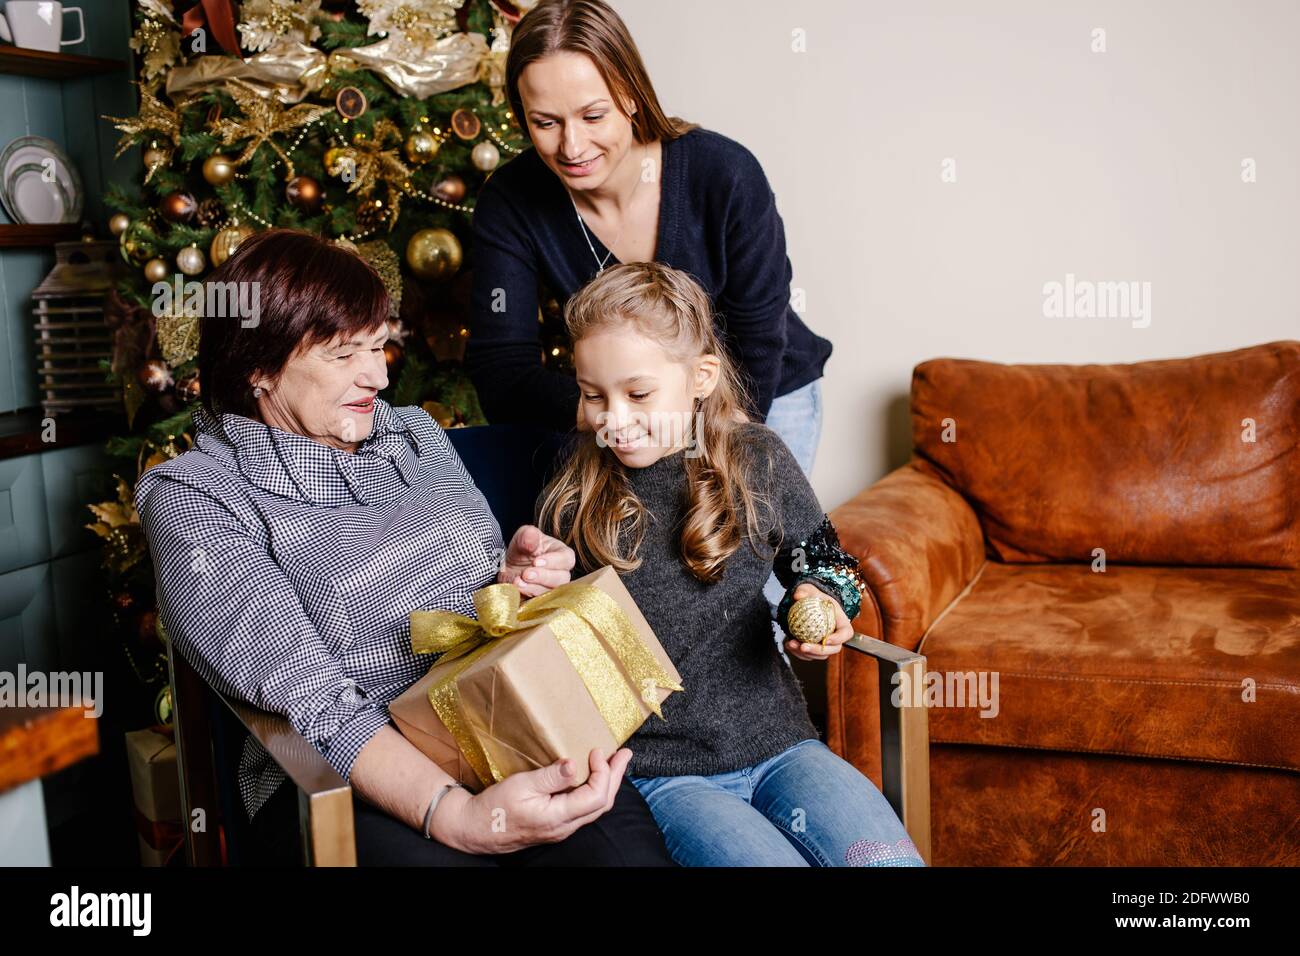 Excited Grandmother Receiving Christmas Gift From Granddaughter At Home  Stock Photo - Alamy